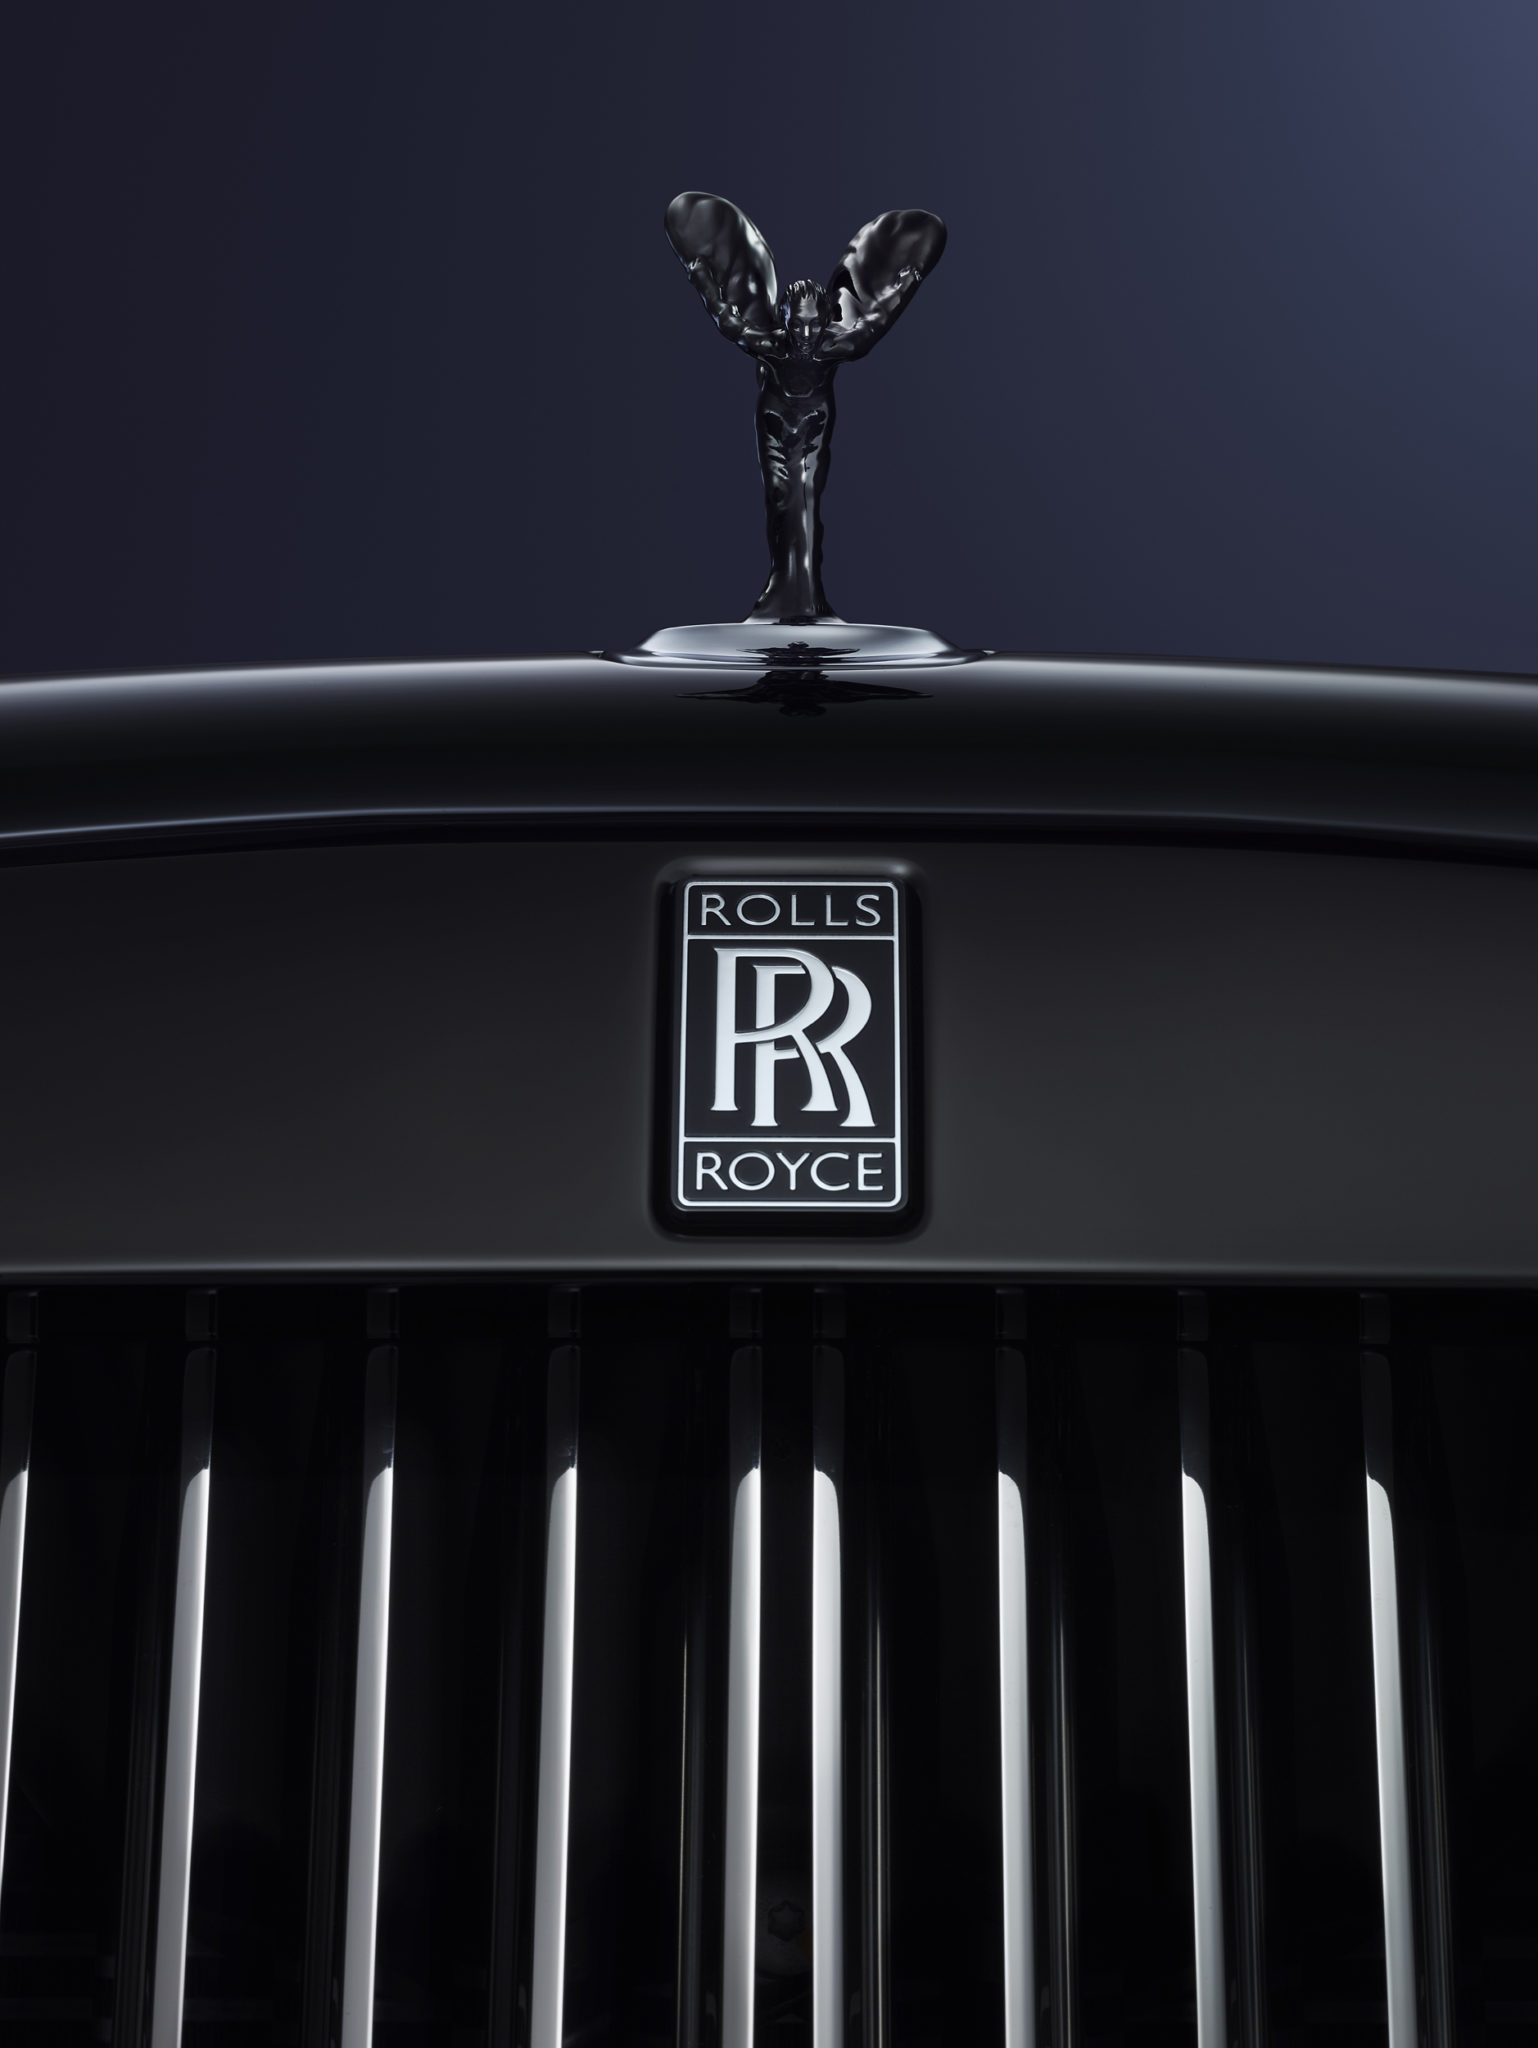 In 1933 the background colour of the Rolls-Royce badge was changed from red to black because it was thought the red sometimes contrasted with the choice of coachwork chosen by some customers. This change is sometimes referred to as a mark of respect for the death of founder Henry Royce, who died in March of 1933, but this is incorrect.